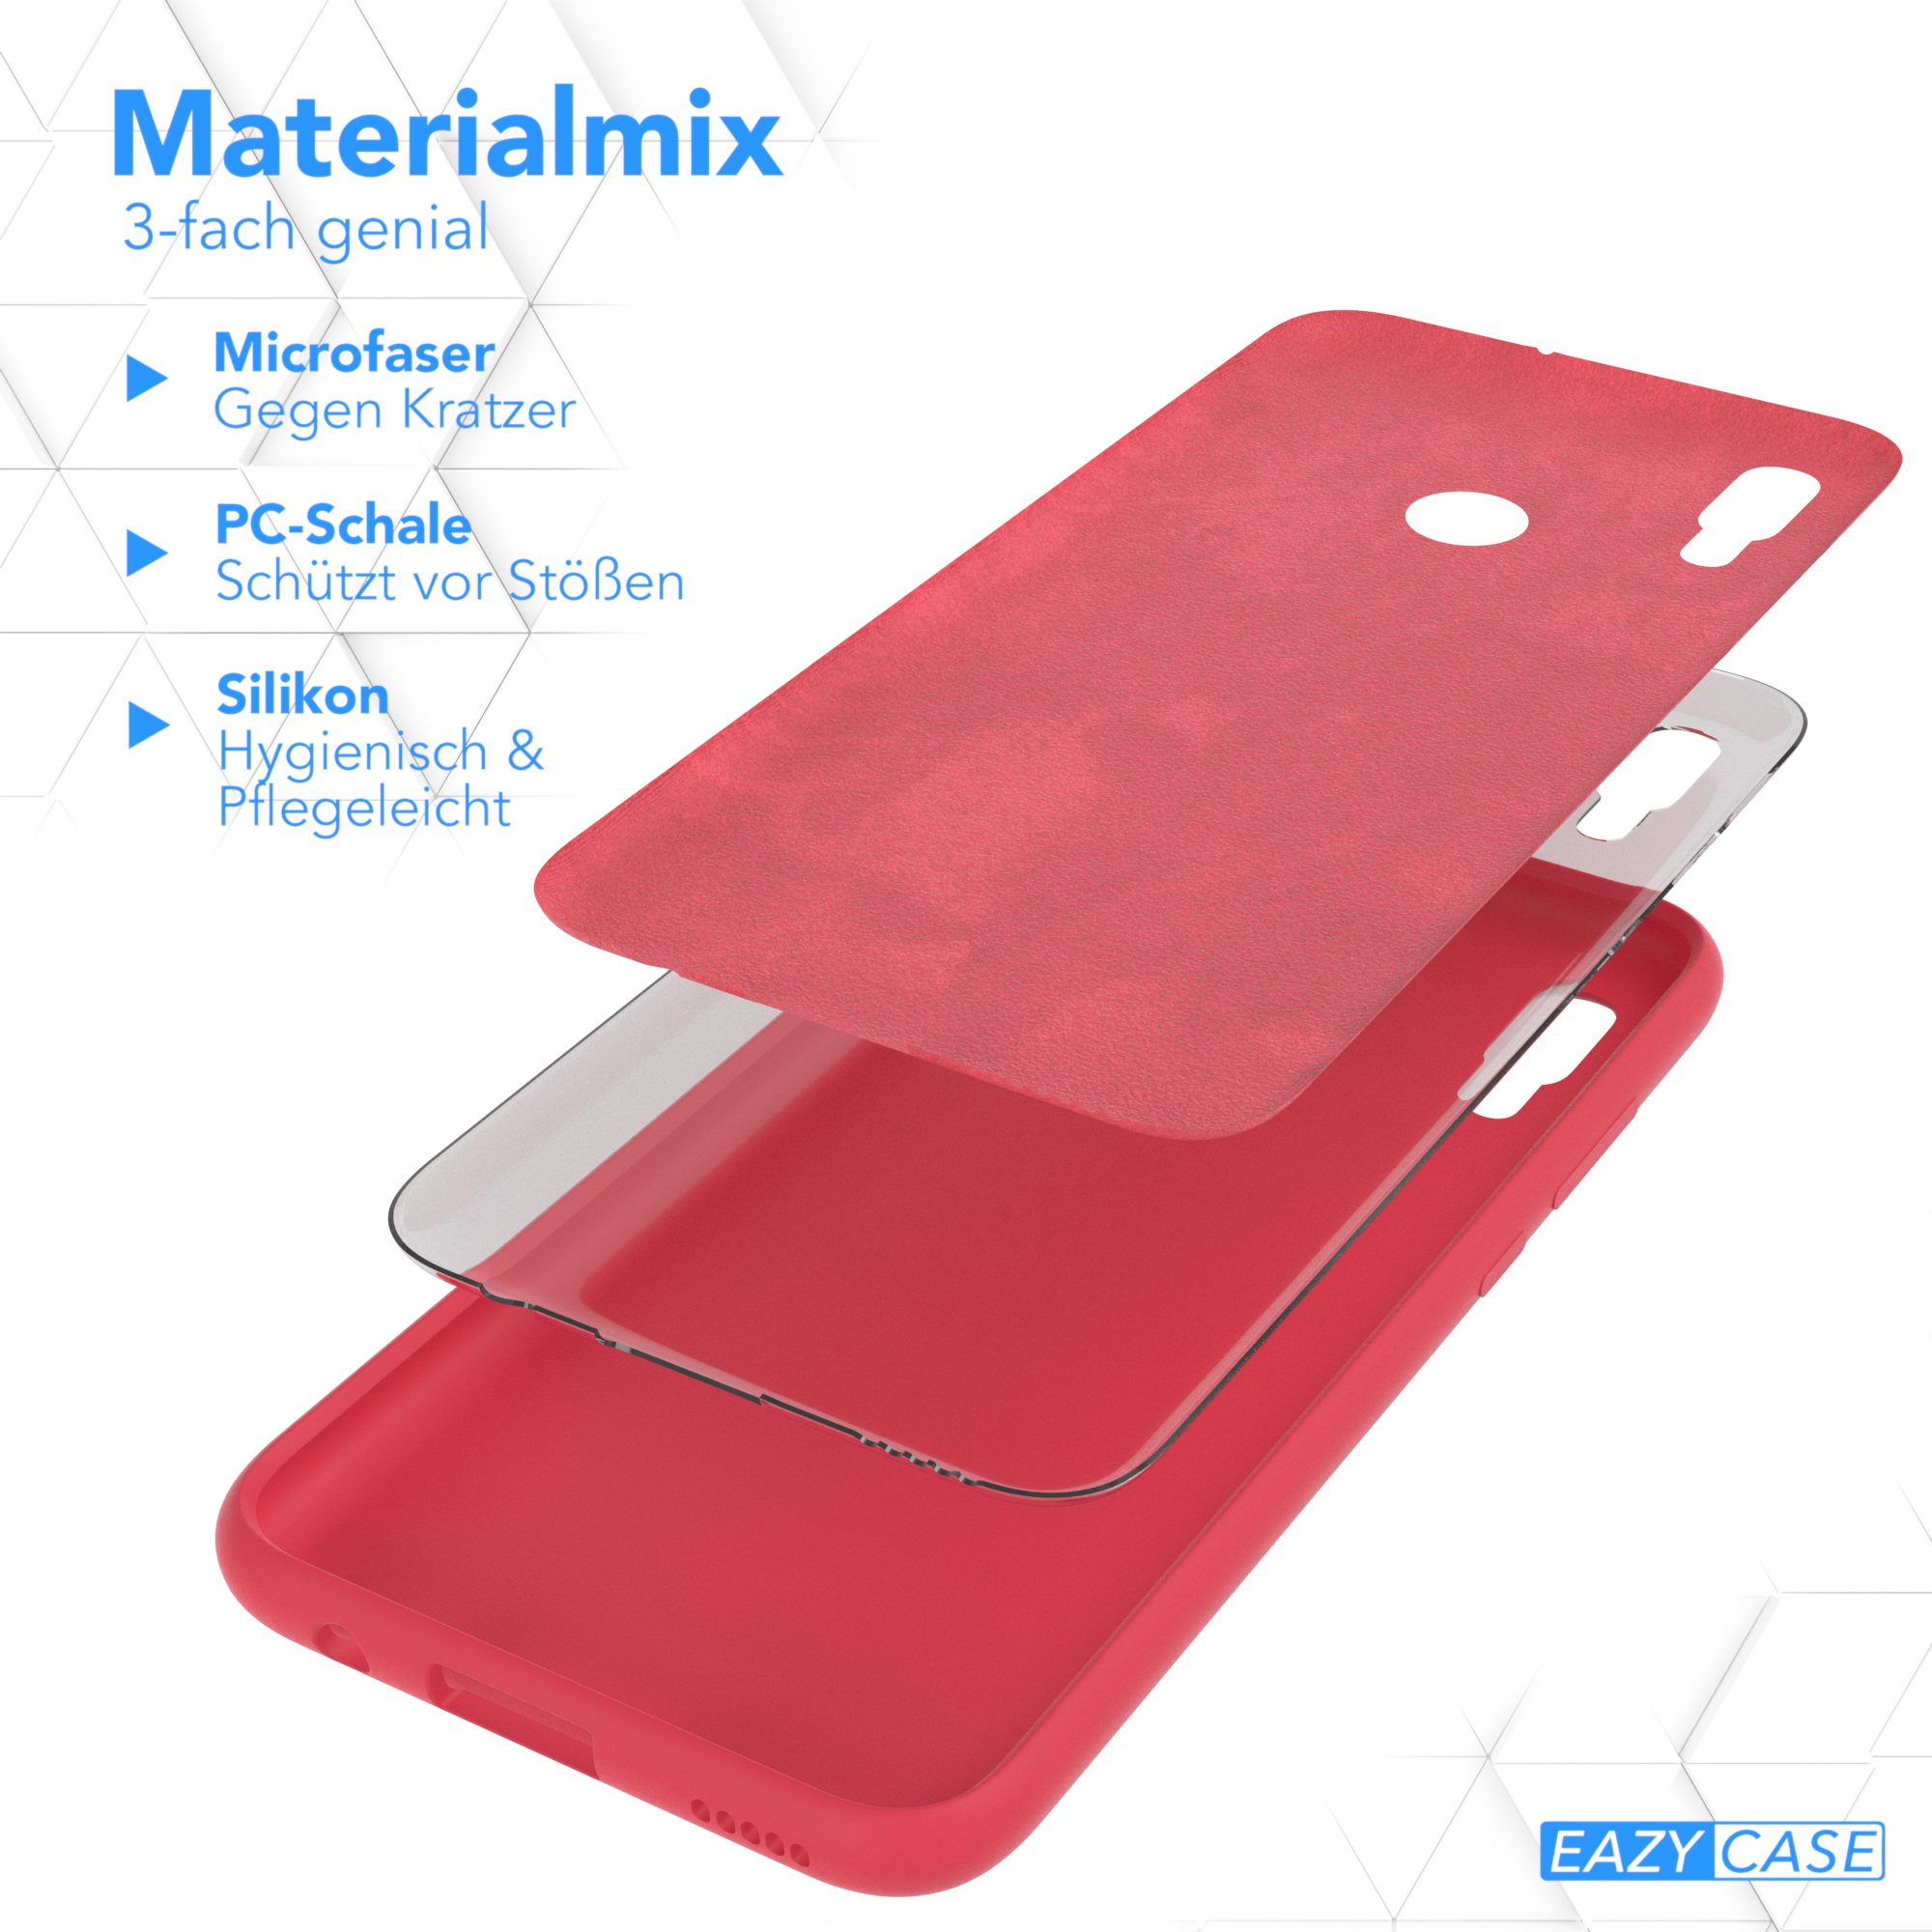 EAZY CASE Premium Silikon Handycase, / Huawei, Backcover, Rot Smart (2019), Beere P